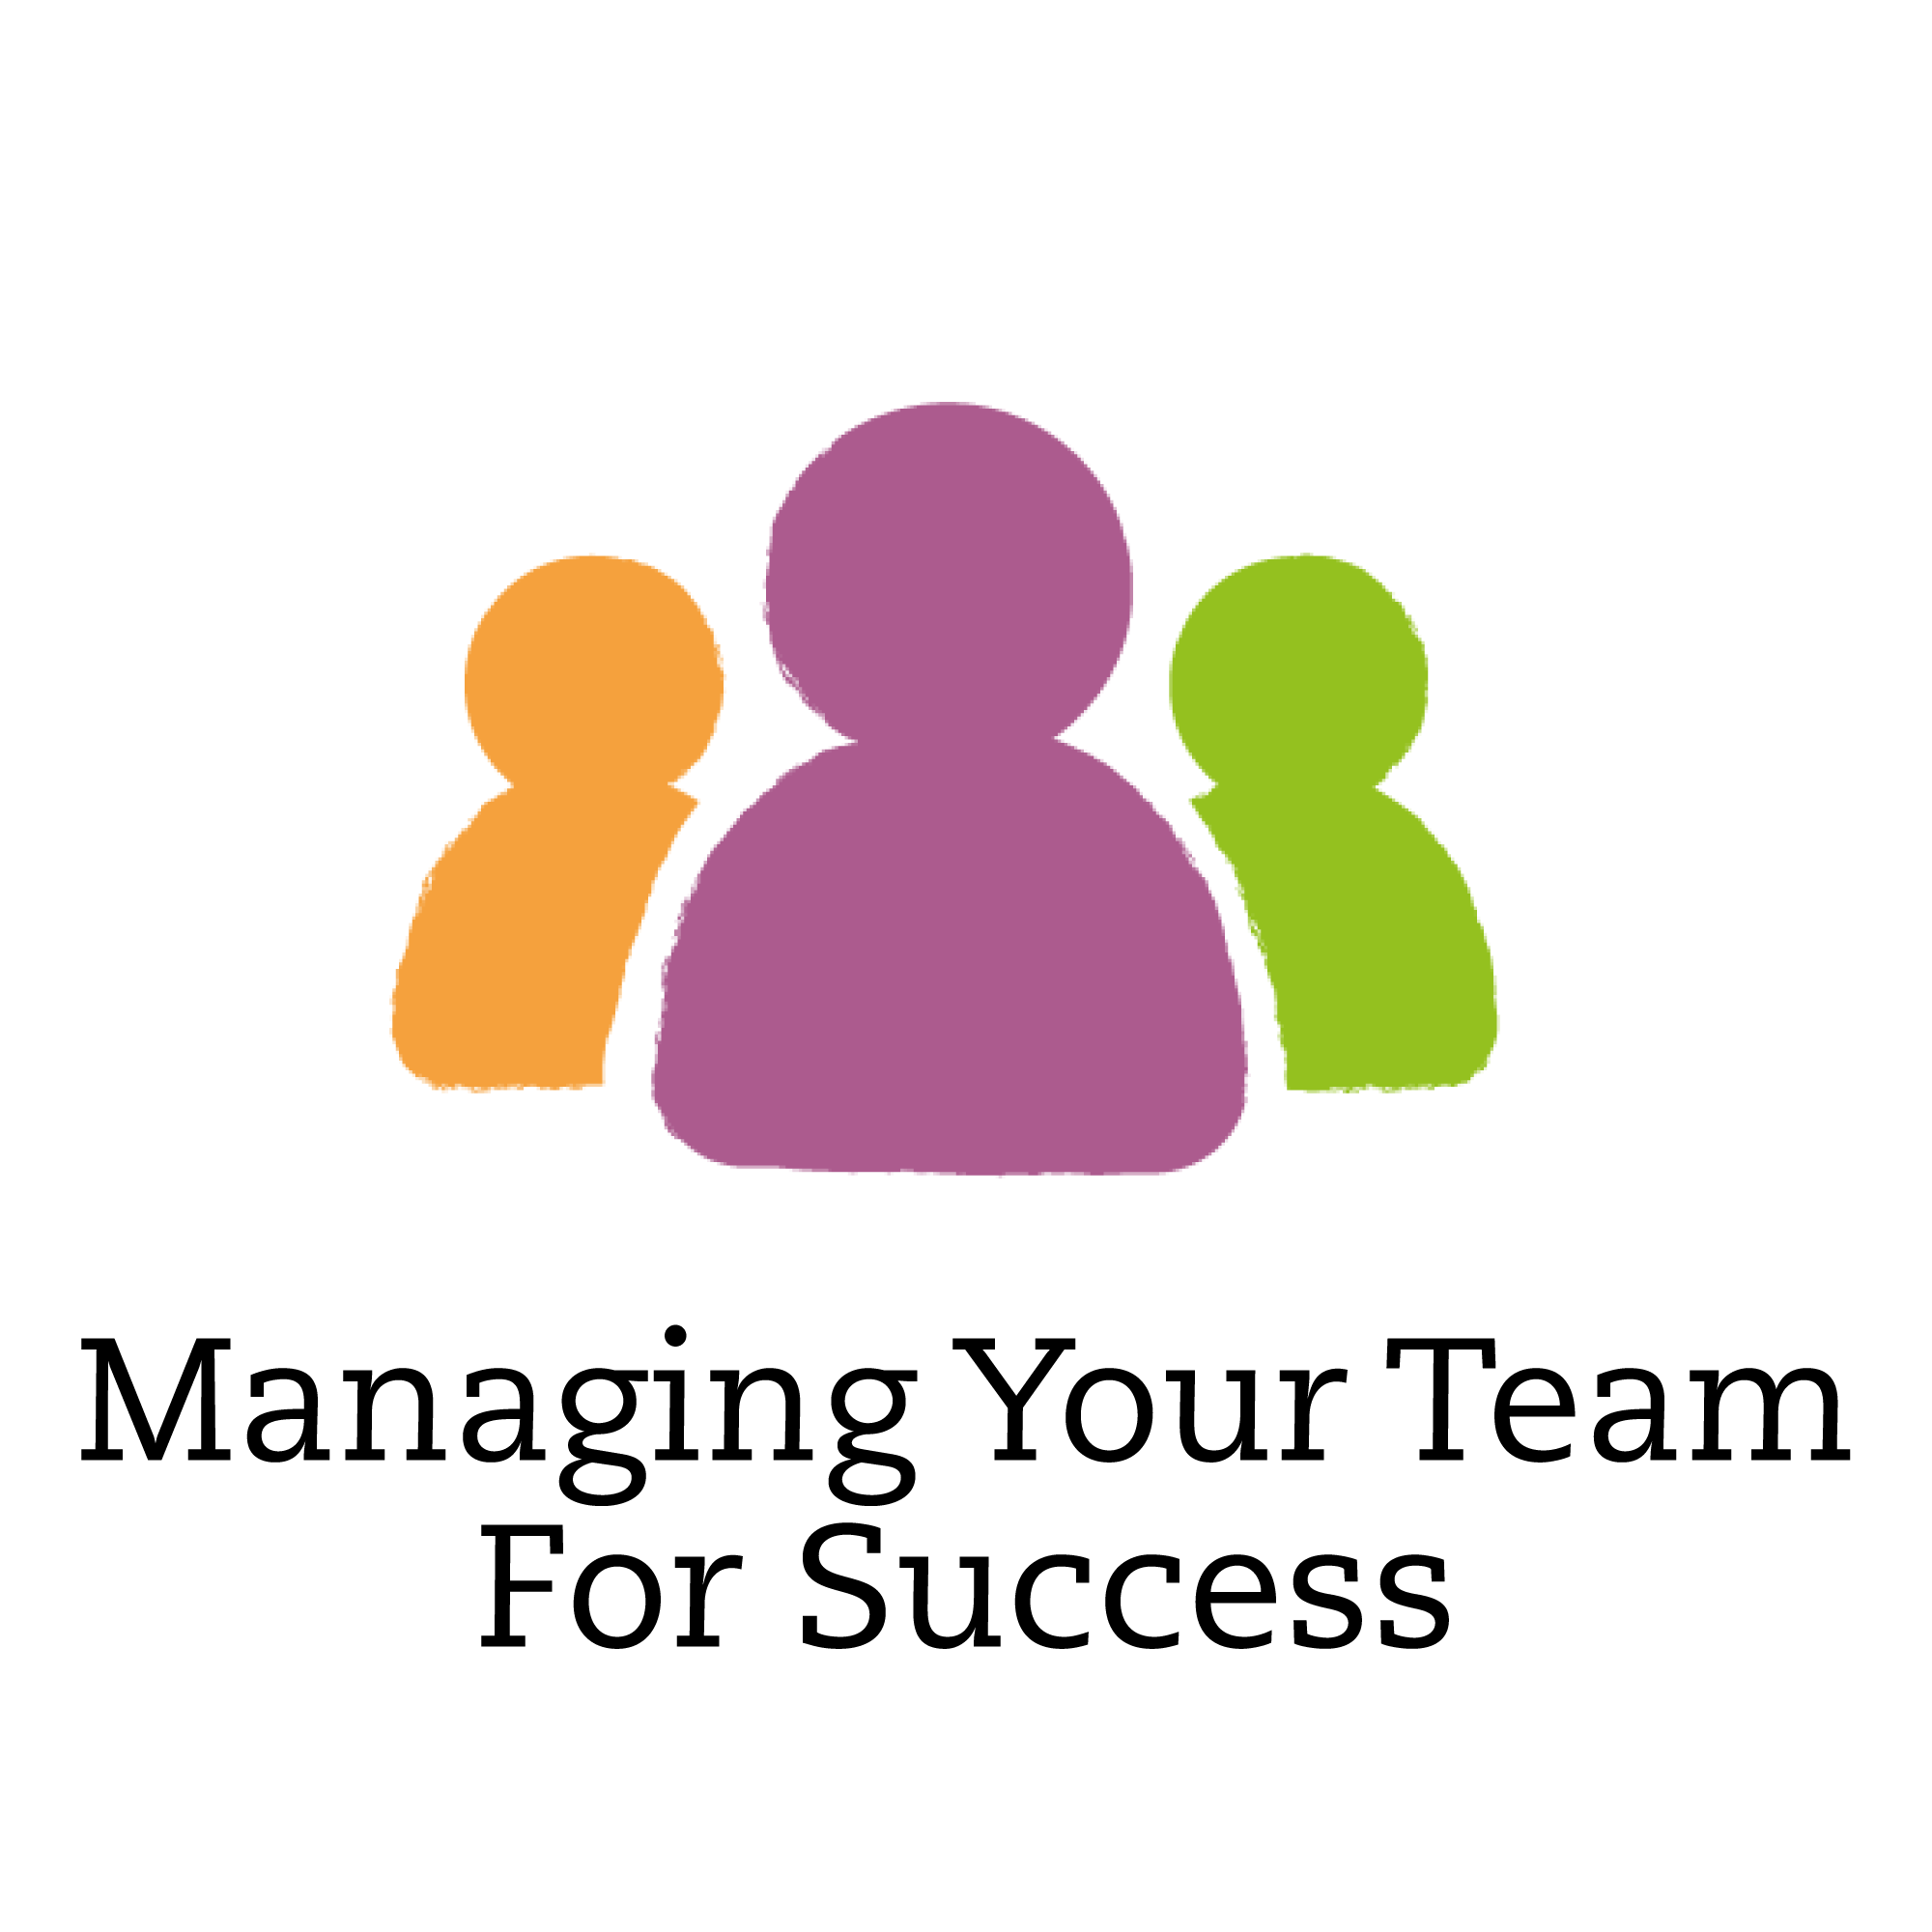 Remote, face-to-face or hybrid service teams – managing your team for success through change (9 July)